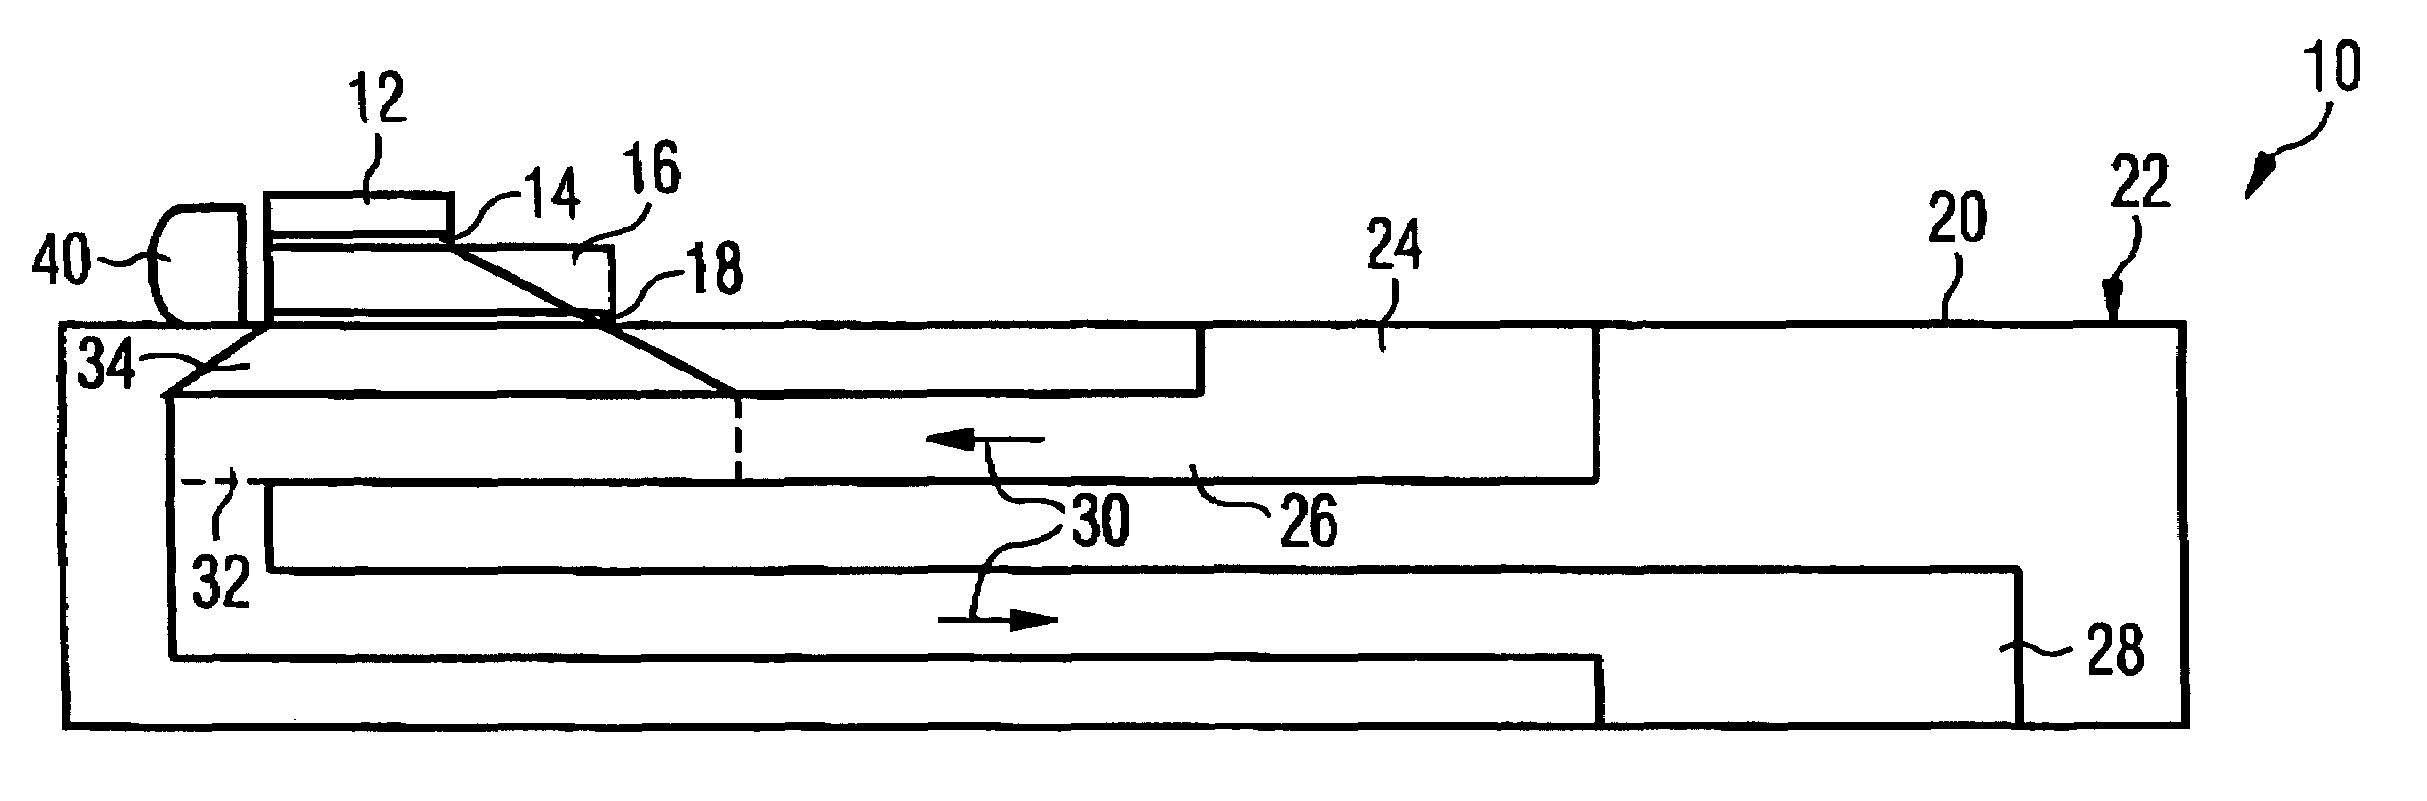 Semiconductor device with a cooling element